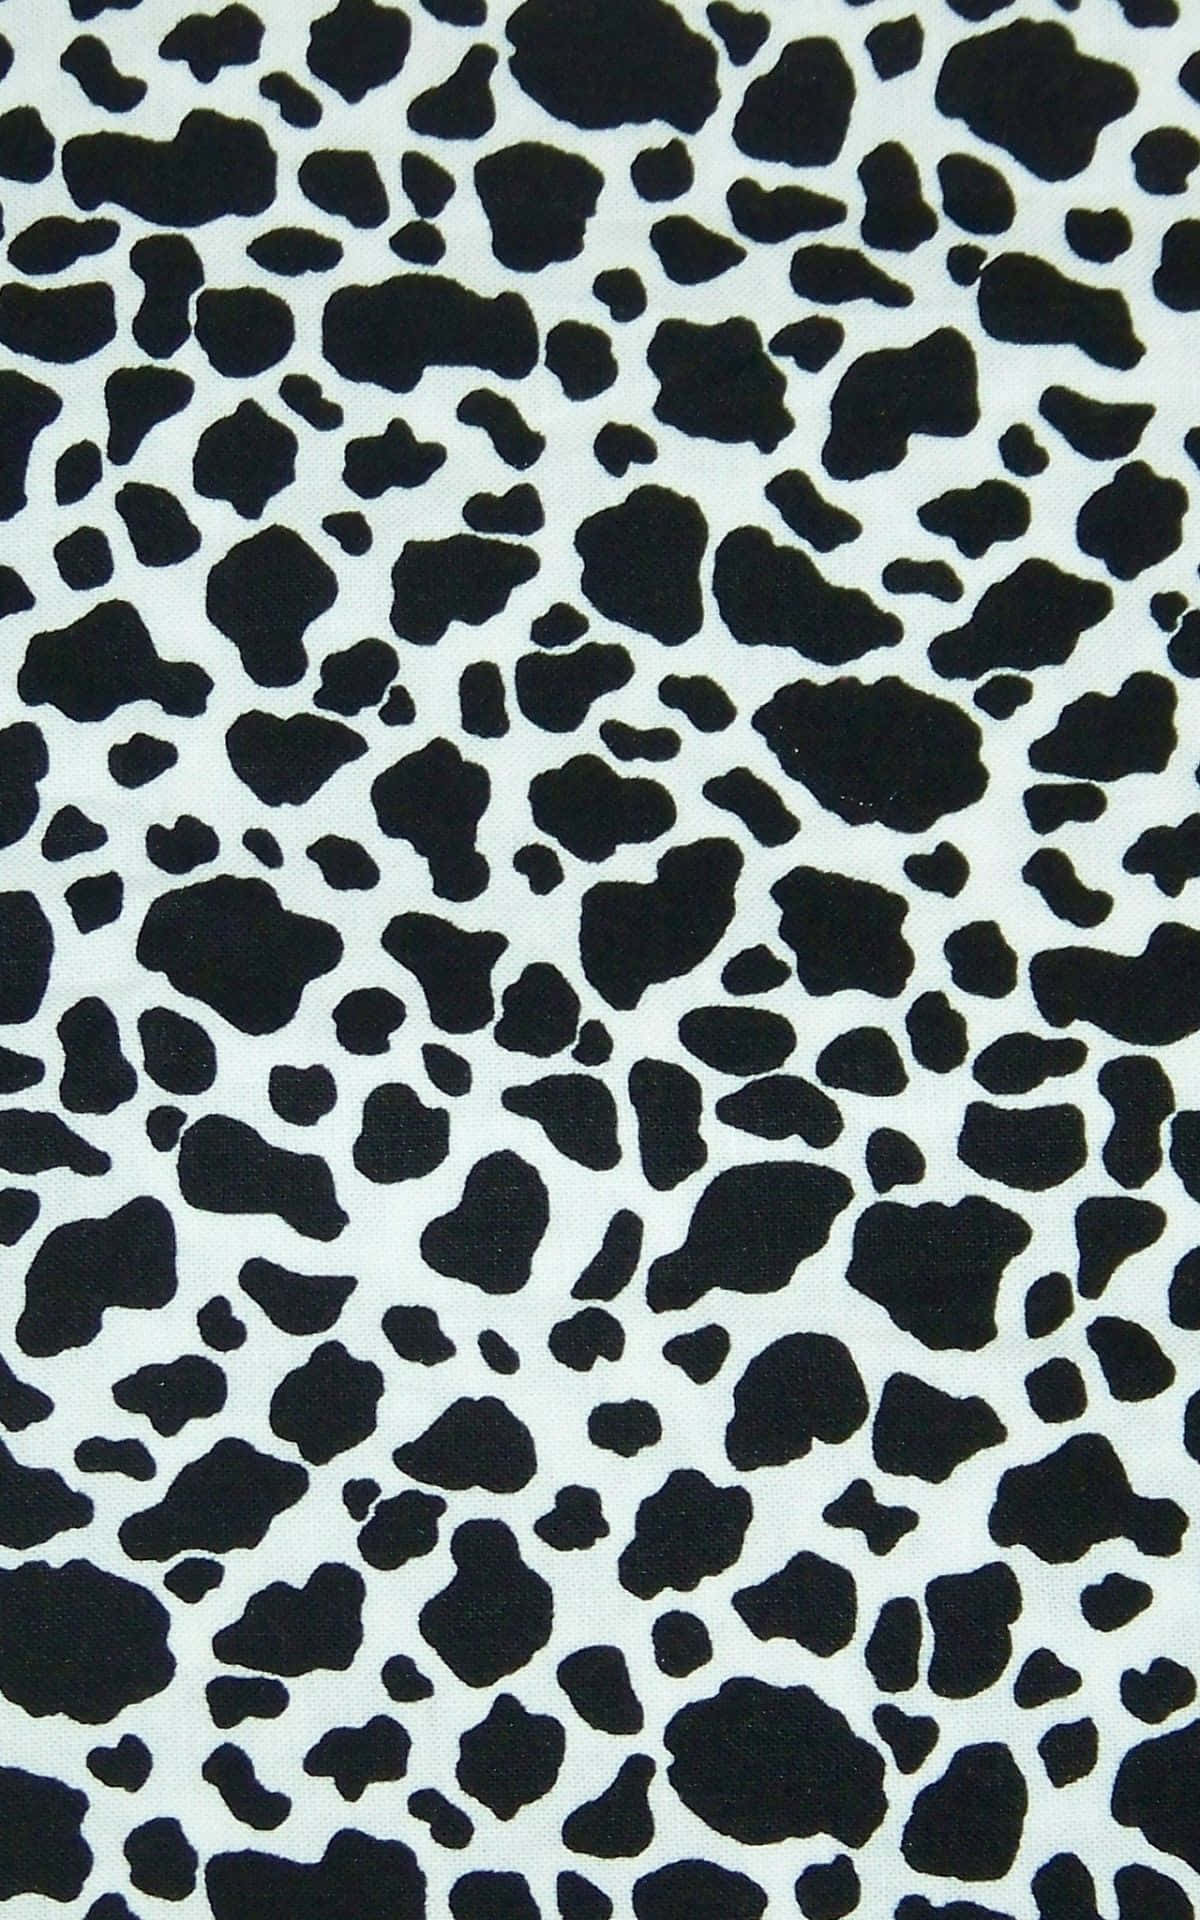 A Black And White Cow Print Fabric Background